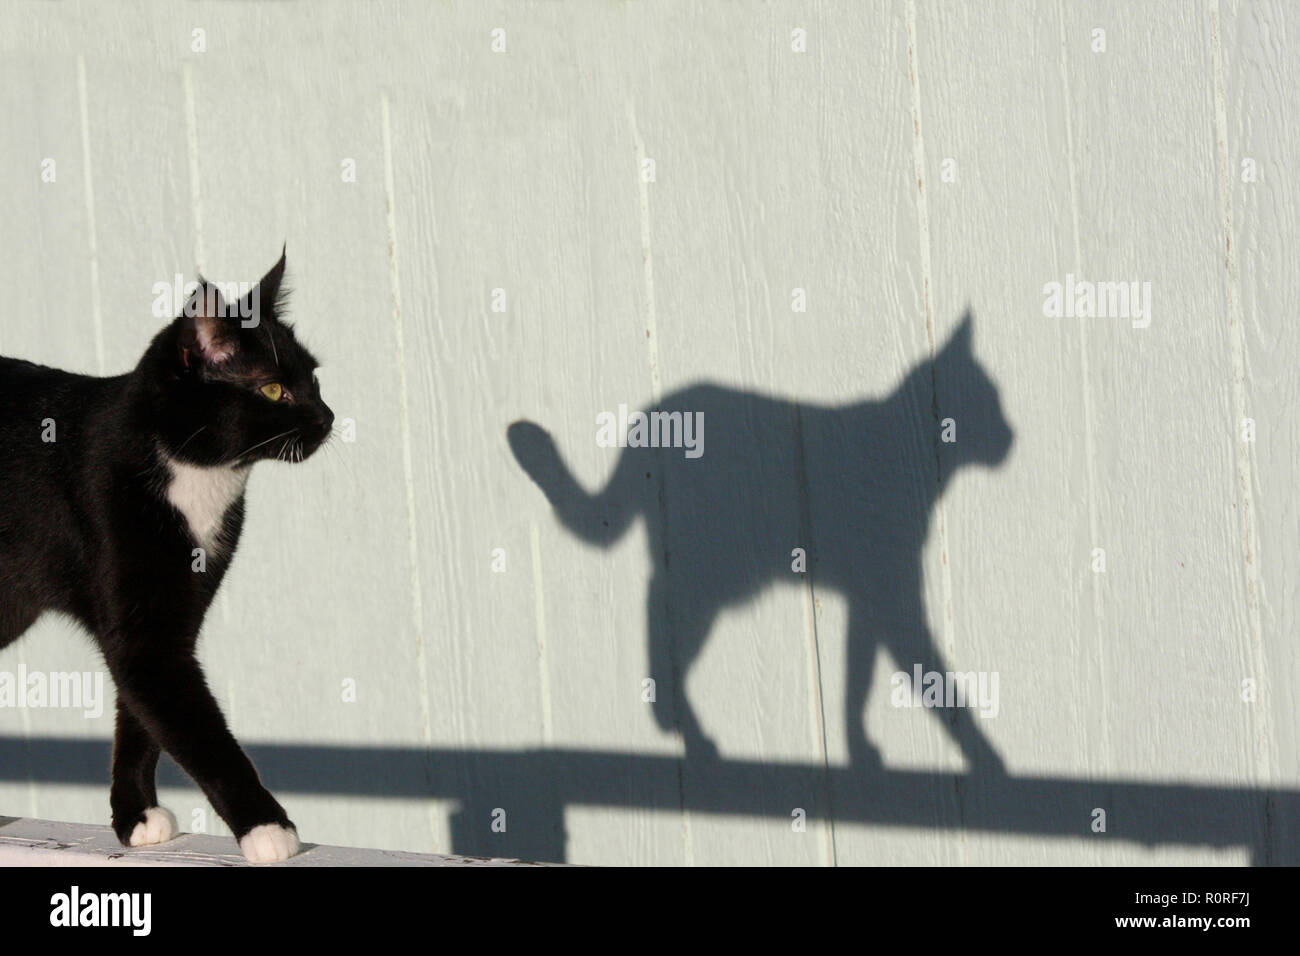 Cat walking forward with Shadow Stock Photo